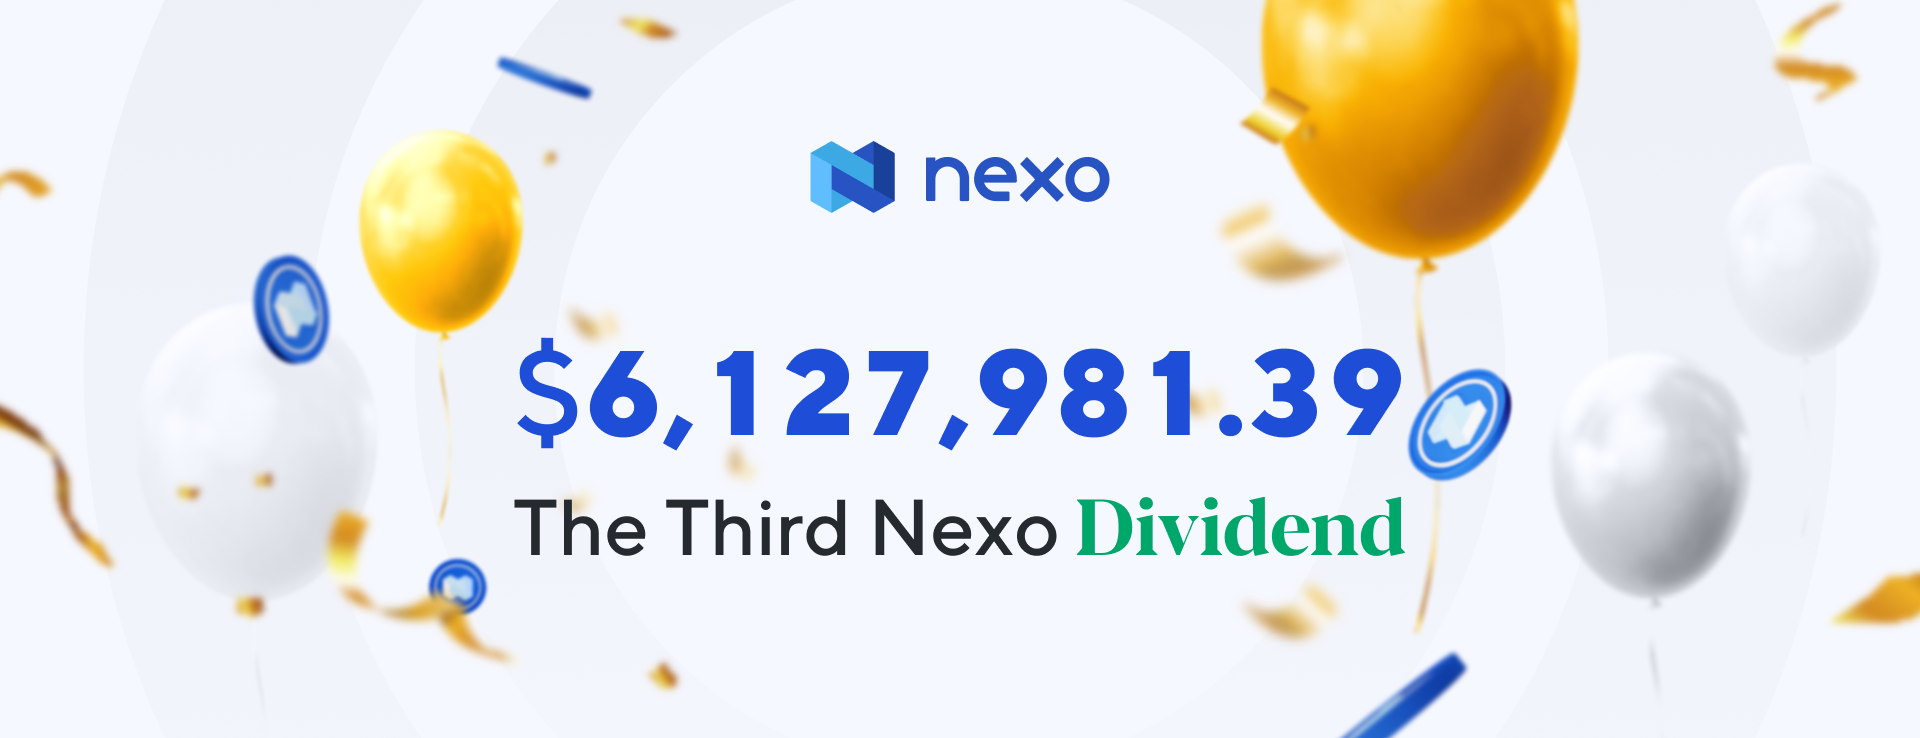 Nexo to Distribute a Record $6,127,981.39 in Dividends